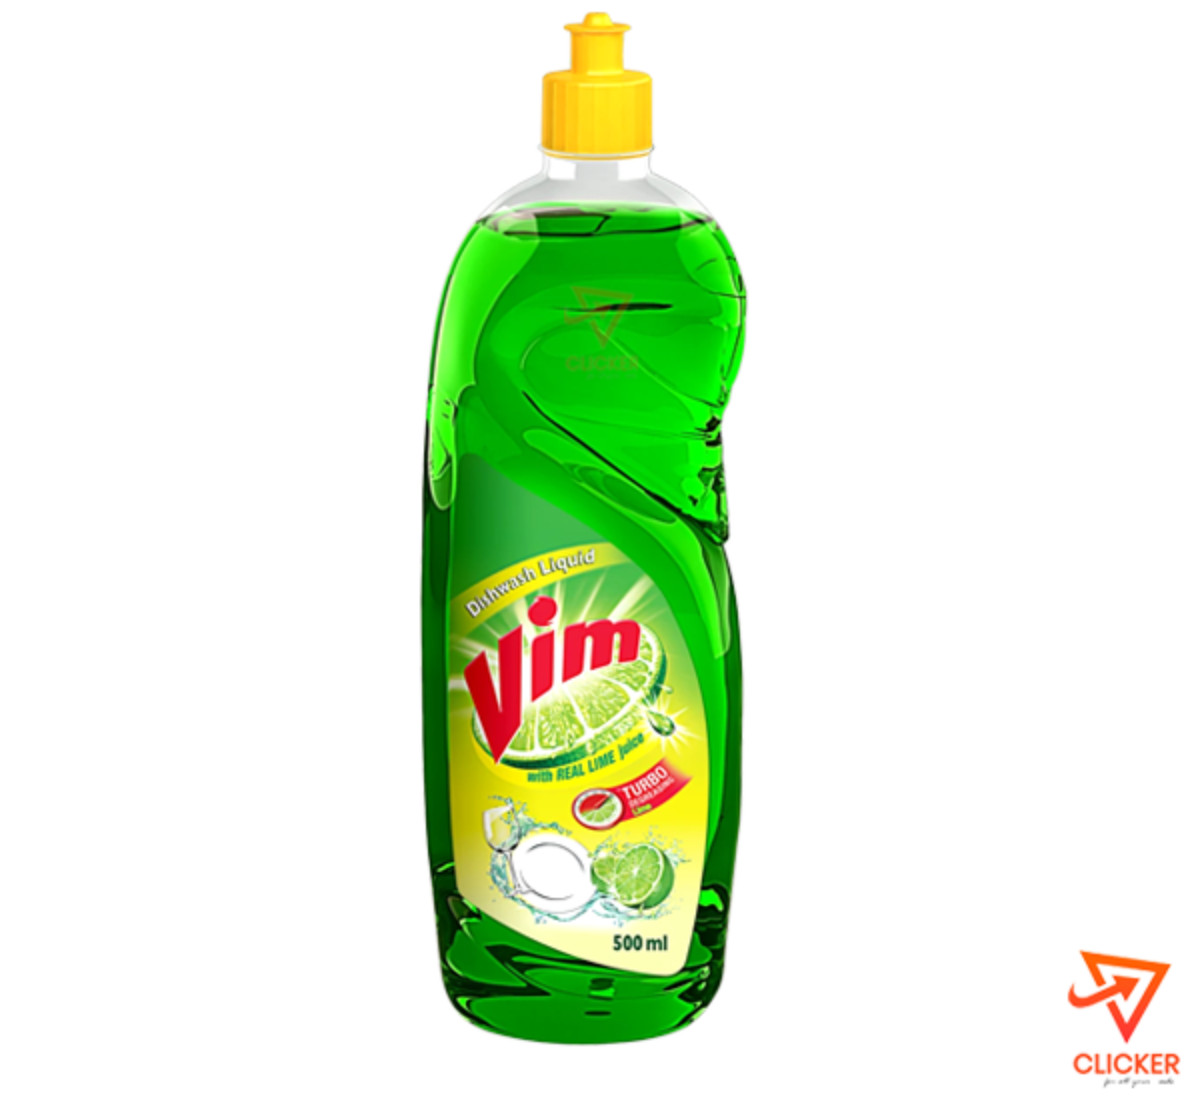 Clicker product 500ml vim liquid with real lime 1123